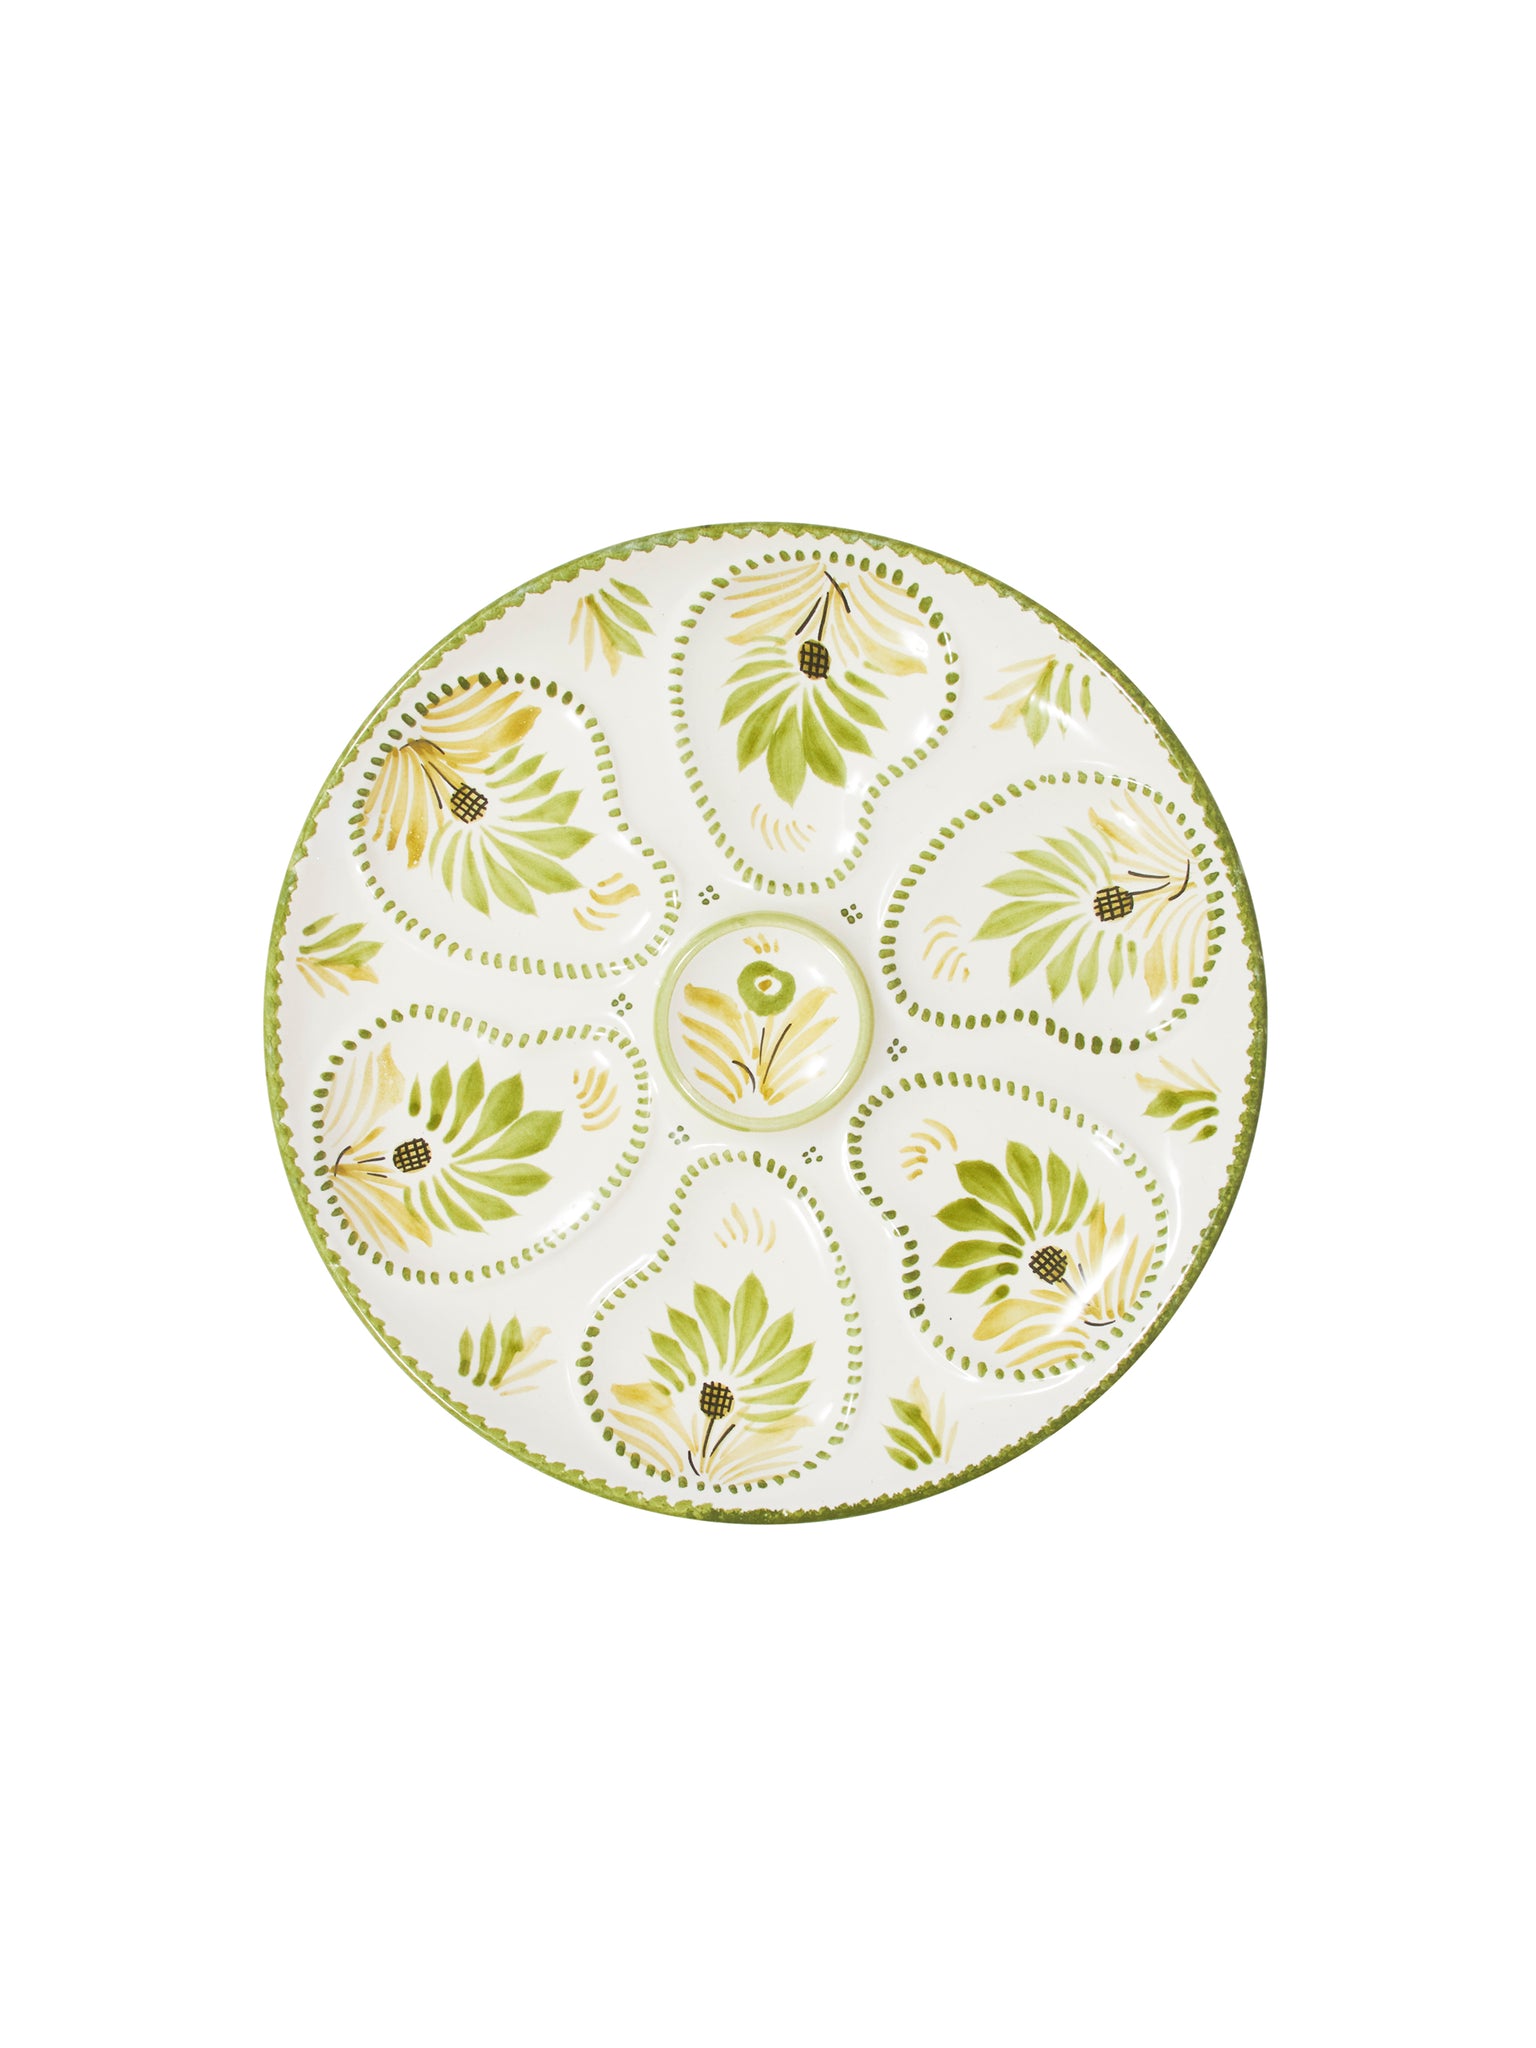 Vintage 1960s Lemon and Lime Quimper Oyster Plate Weston Table